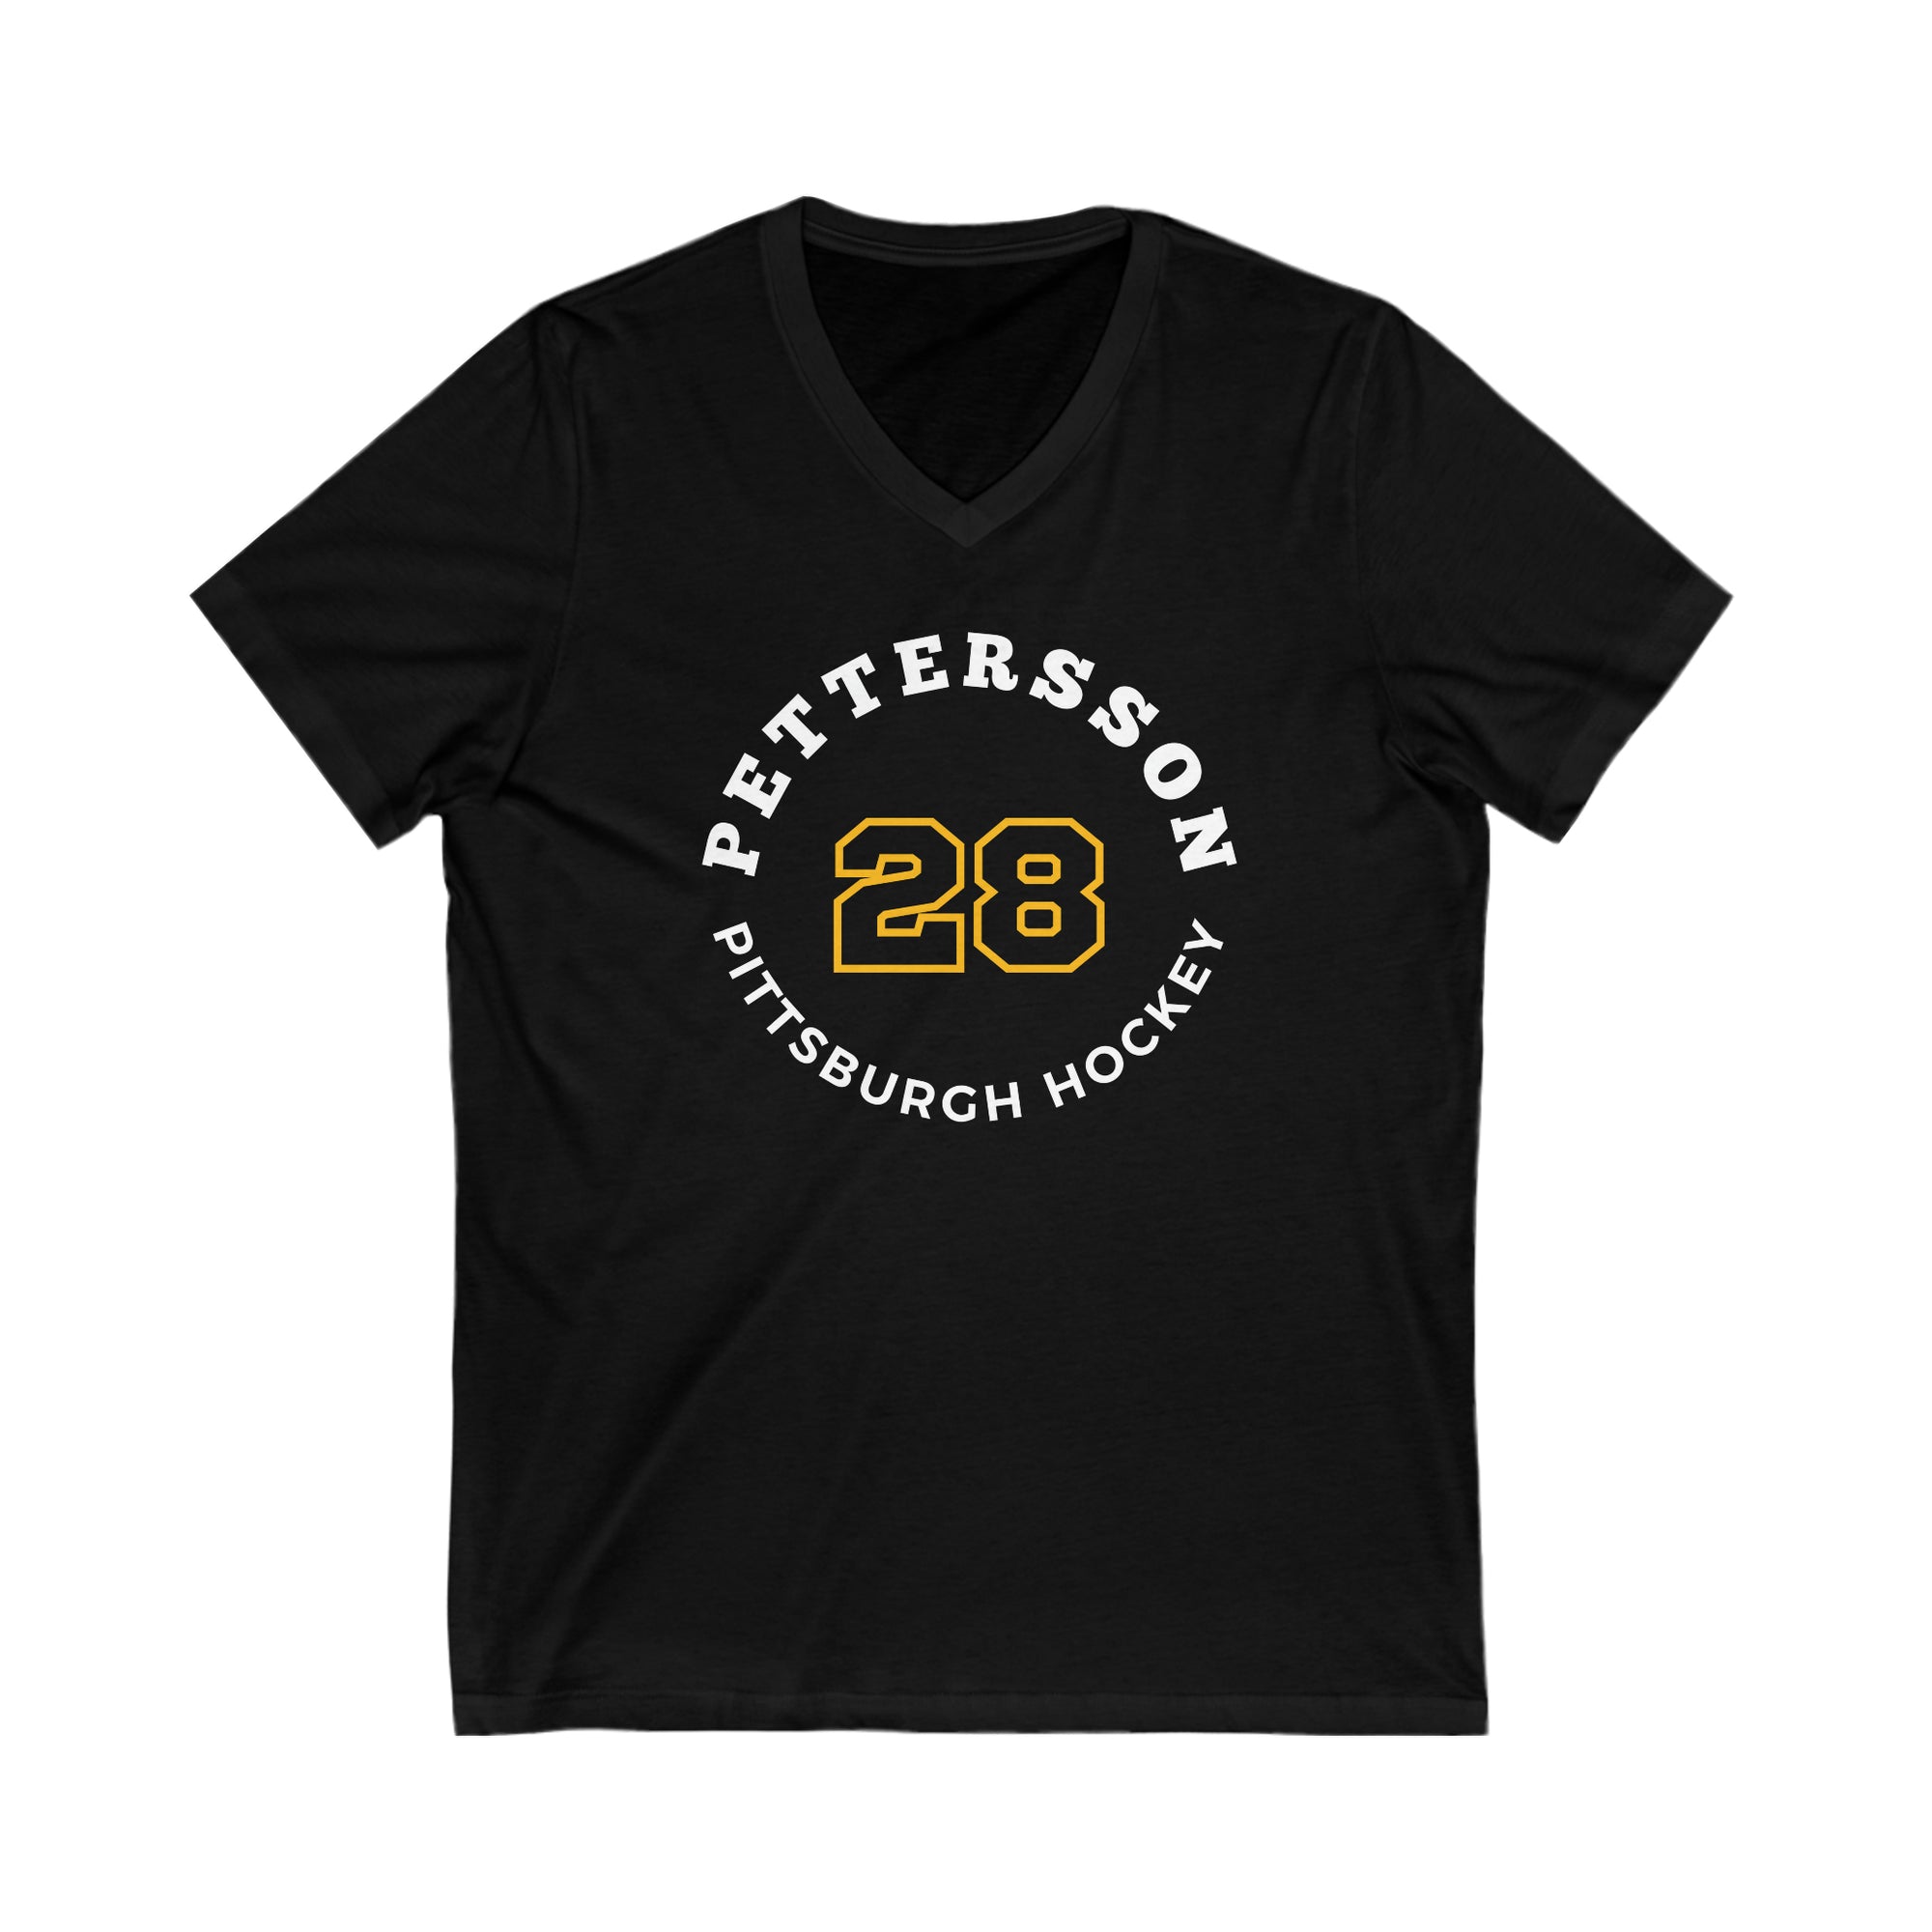 Pettersson 28 Pittsburgh Hockey Number Arch Design Unisex V-Neck Tee